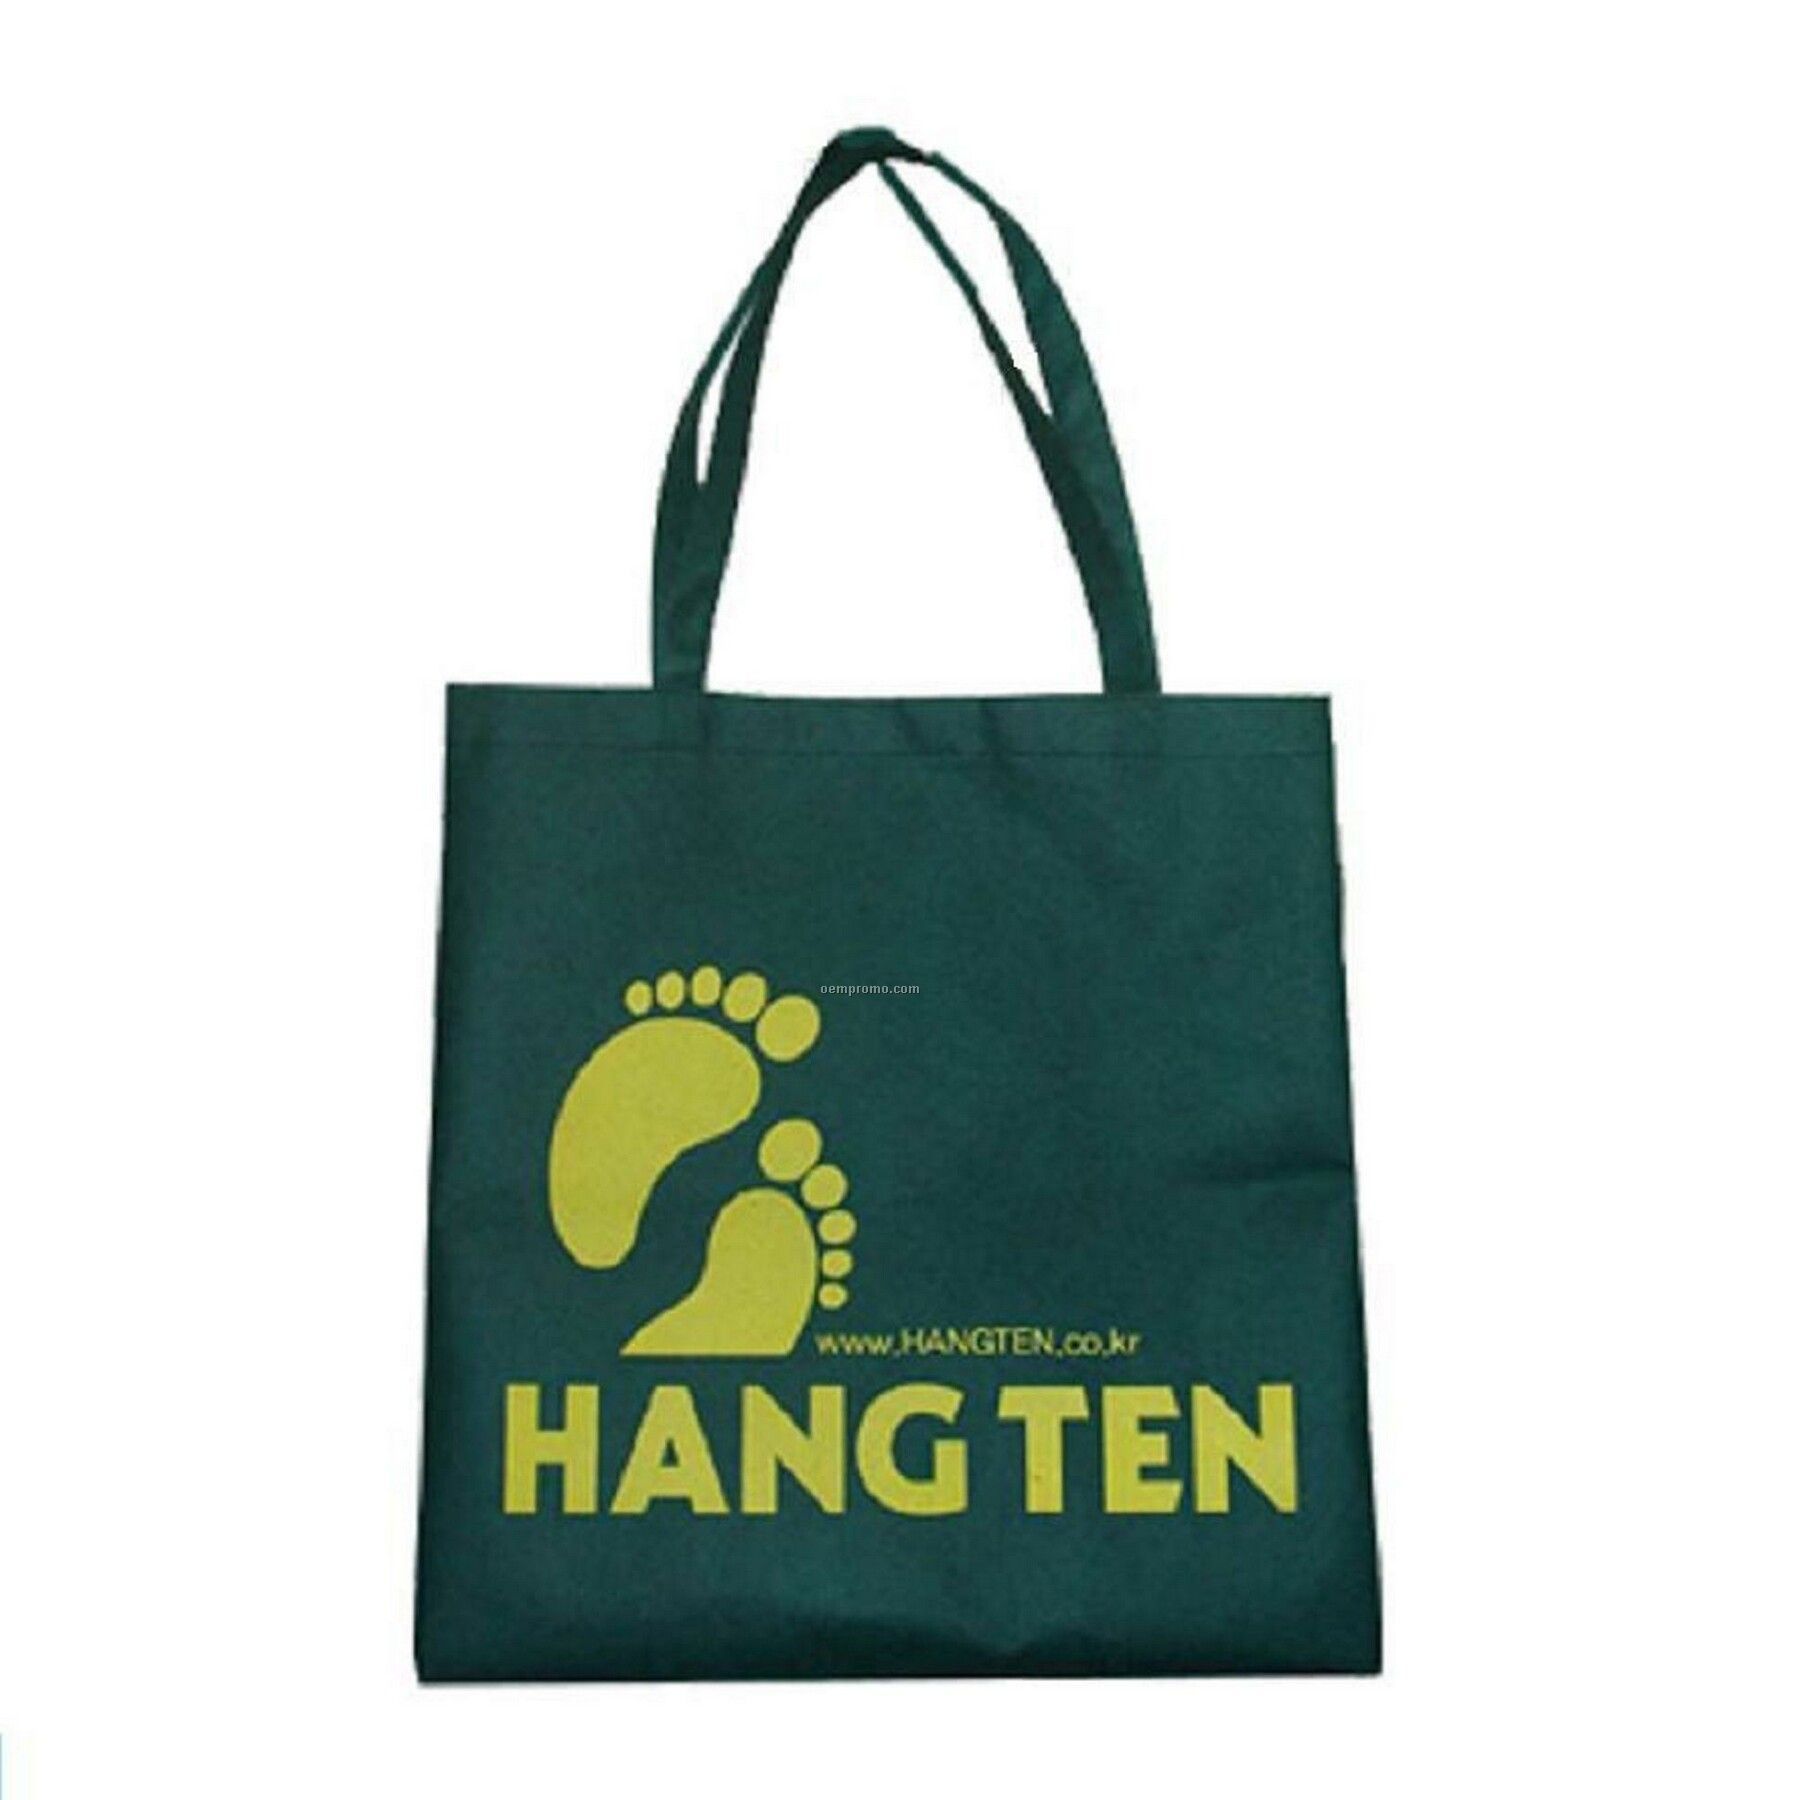 High Quality Non Woven Tote Bag. 80 Gsm Fabric, Measures 12